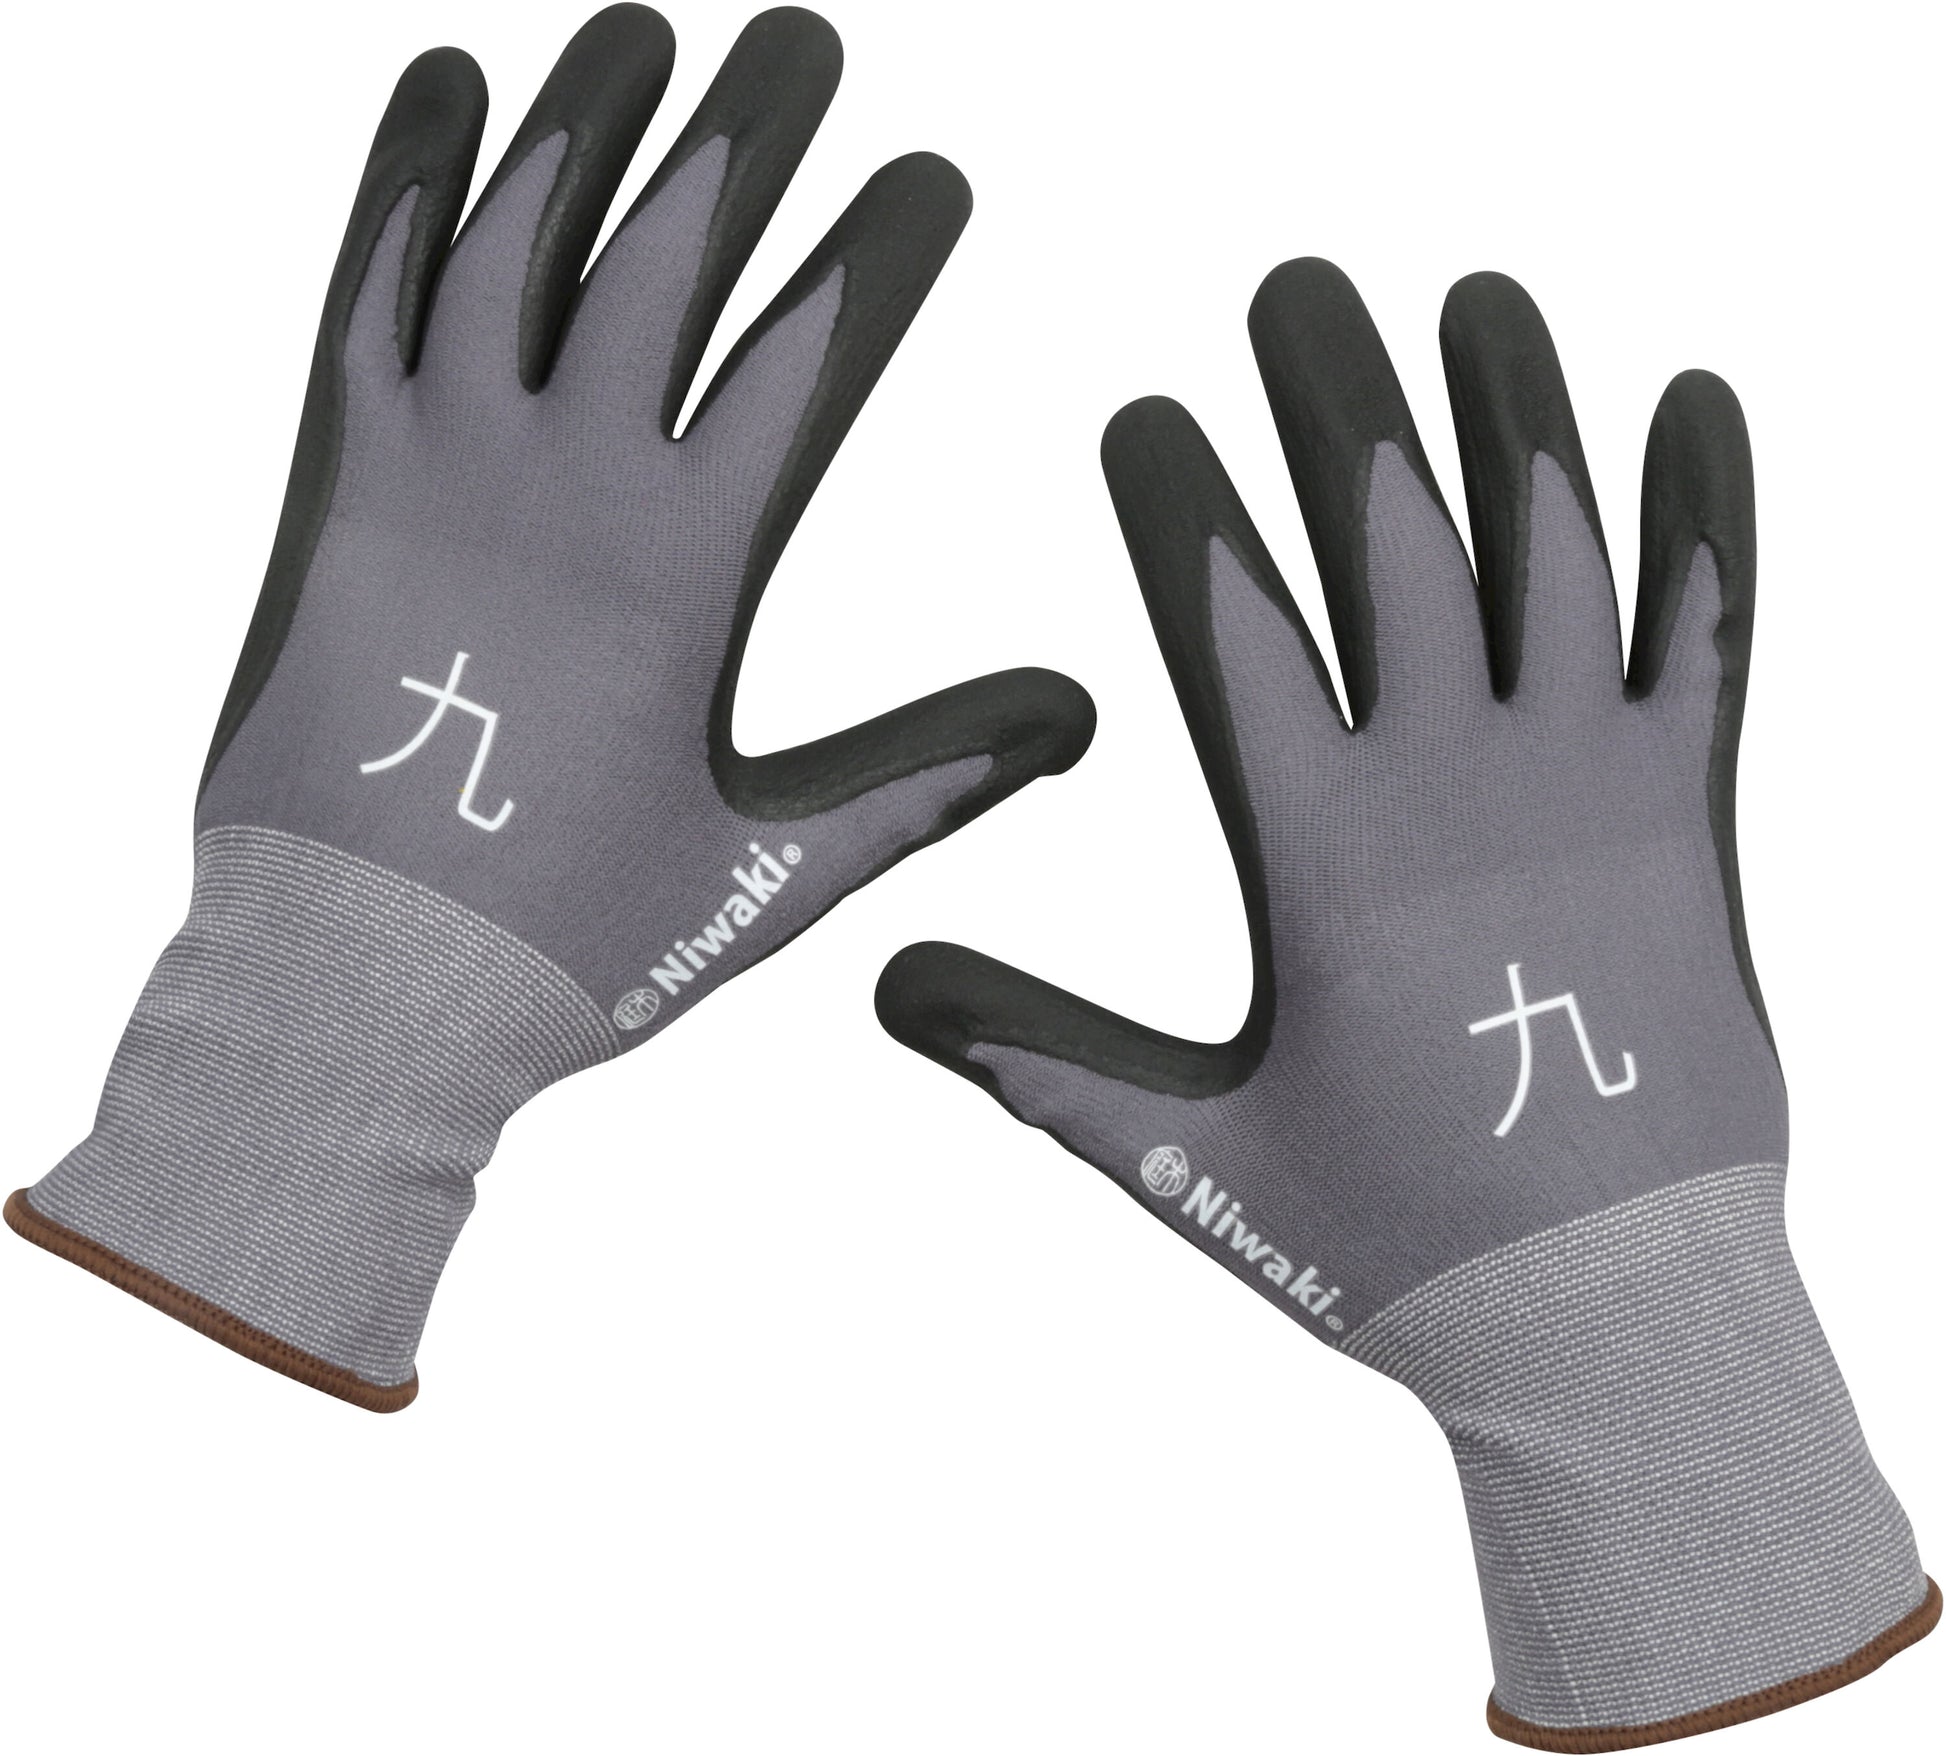 Flexible, easy-use garden gloves with breathable nylon-spandex liner and nitrile coating by Japanese-inspired Gardening experts Niwaki.